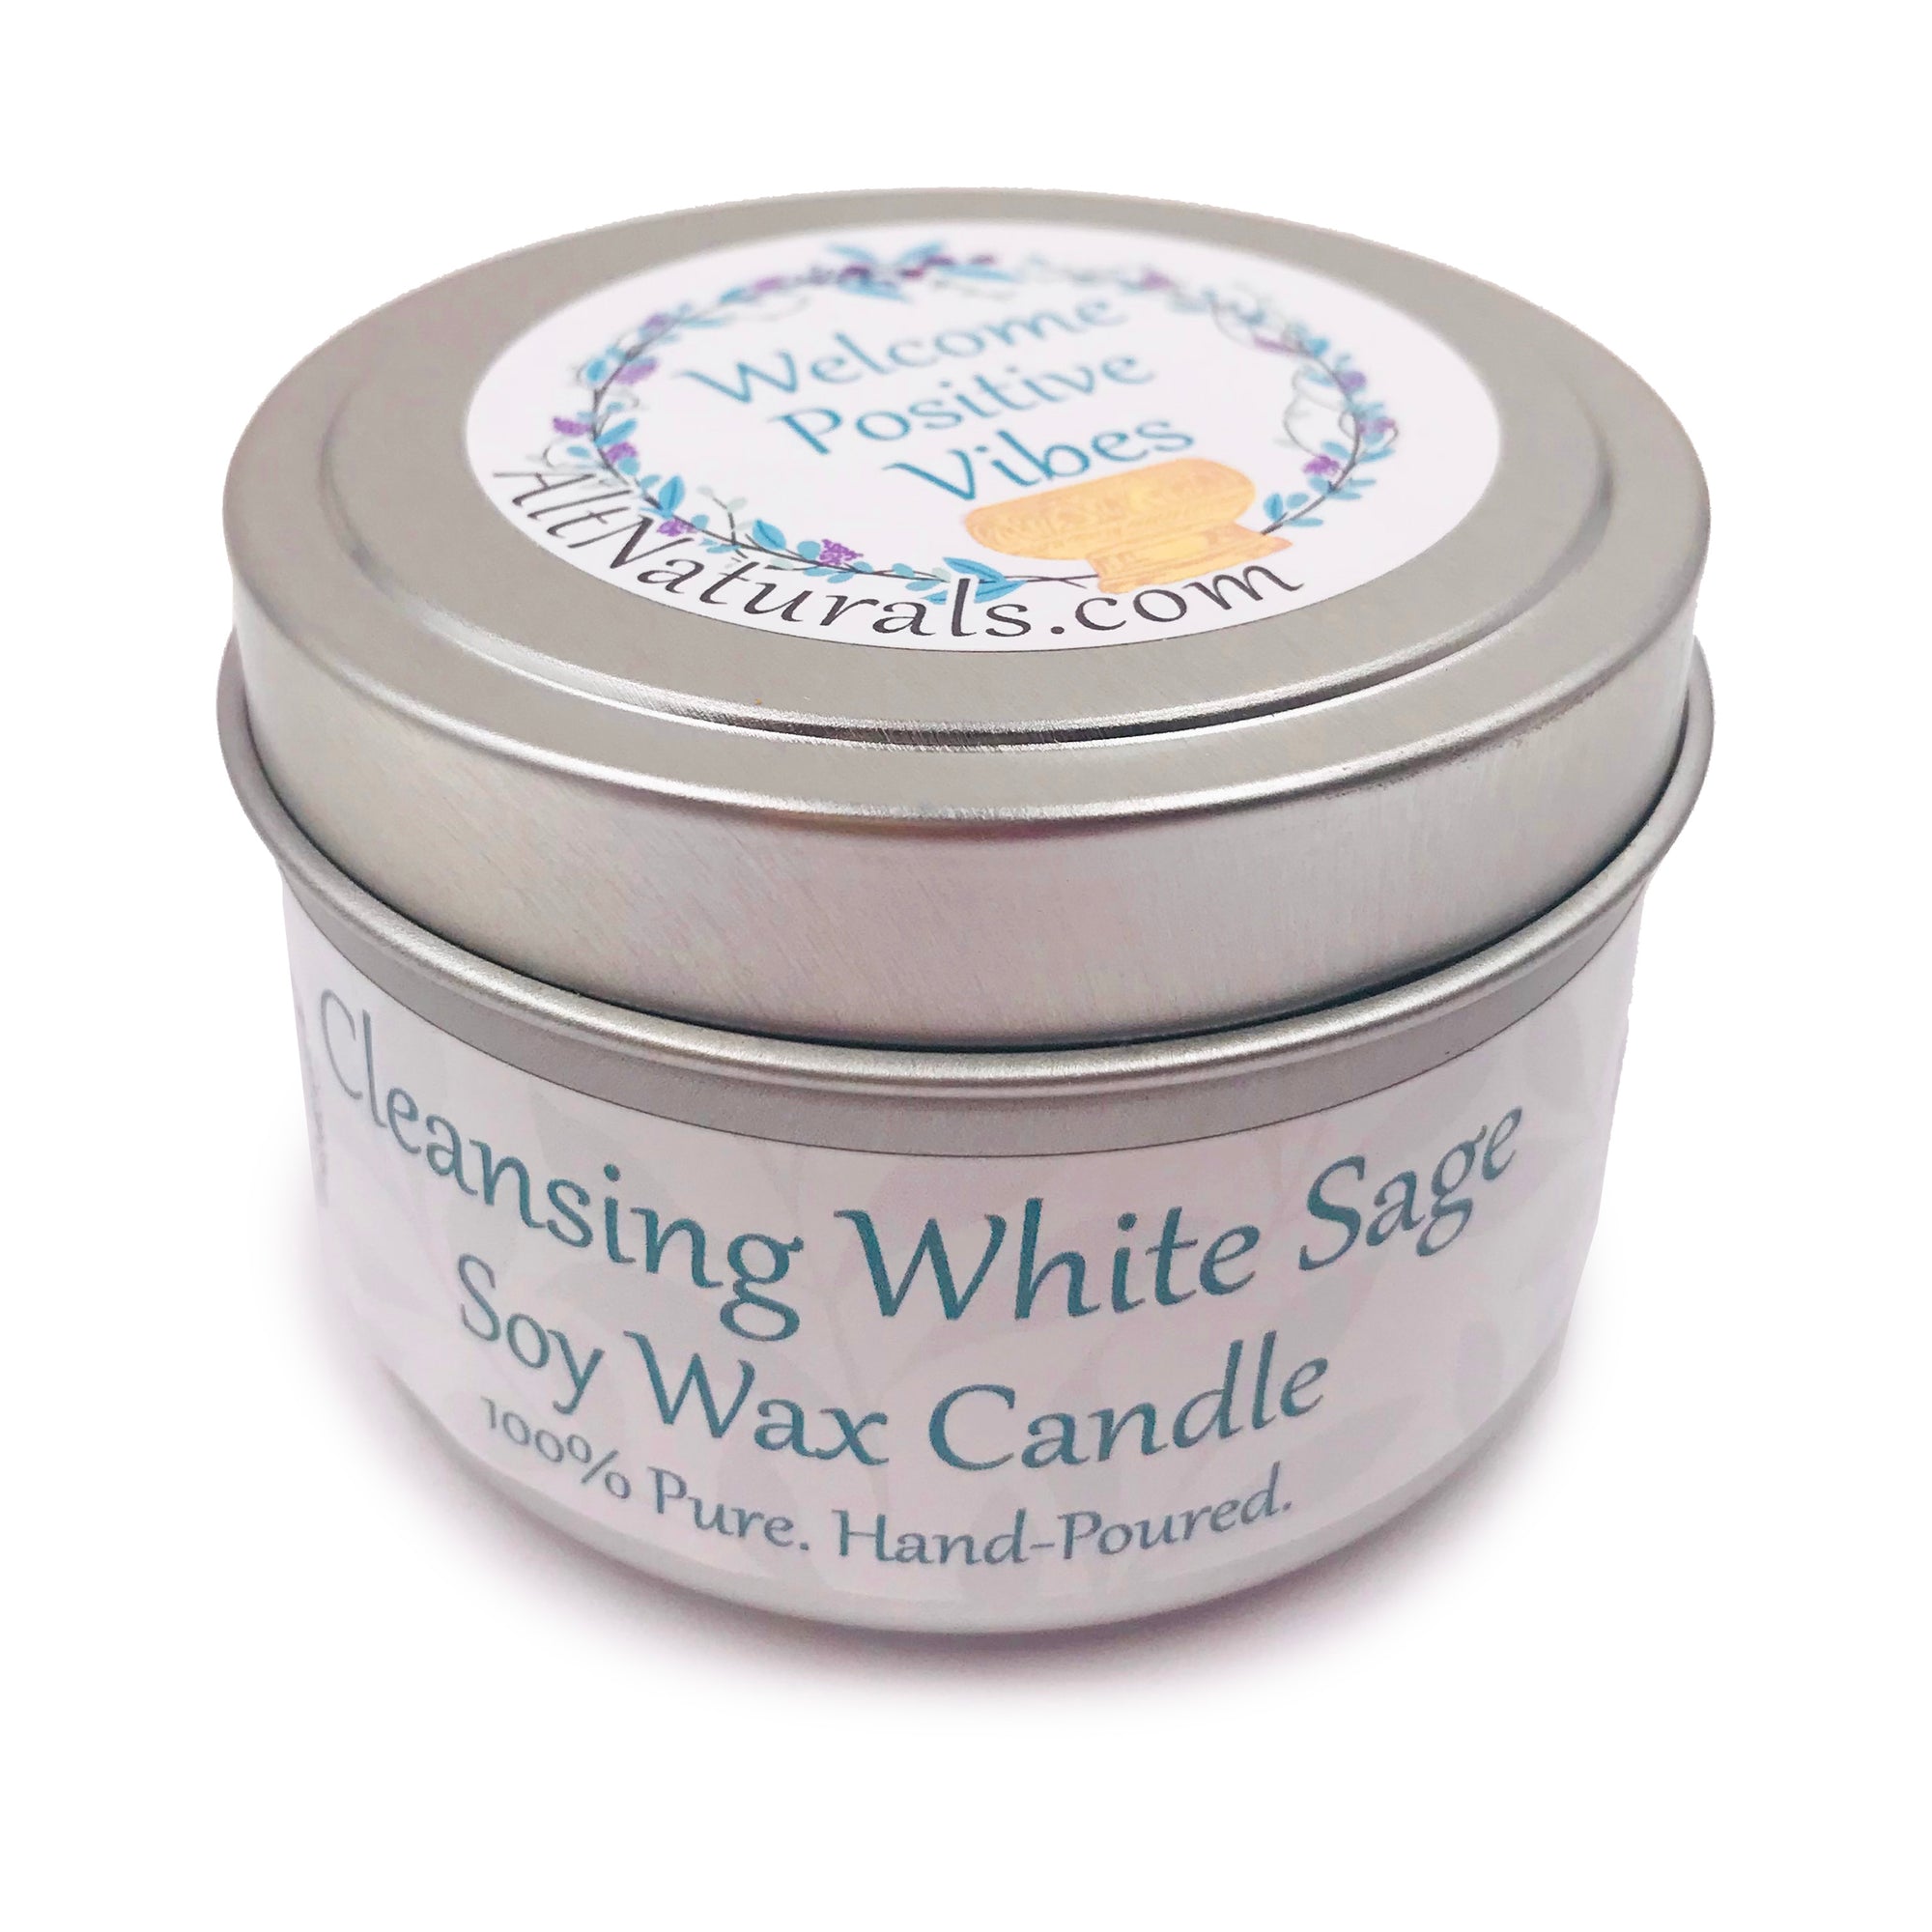 Cleansing White Sage Soy Candles - Pack of 3, 4 Ounce Candles